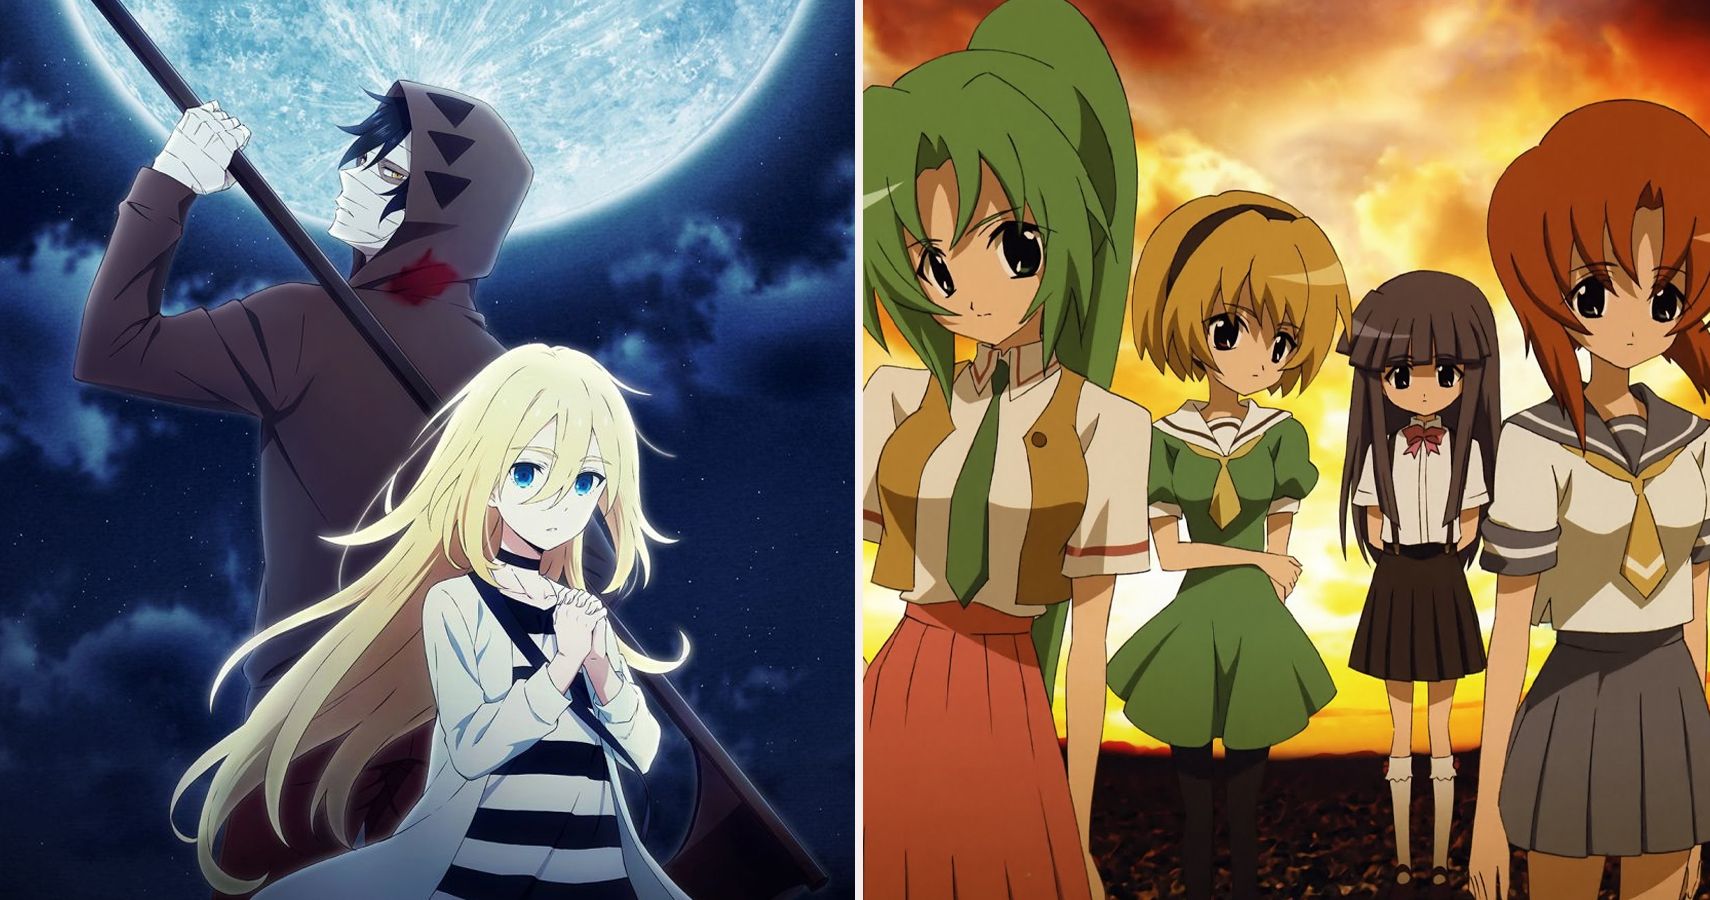 10 Zombie apocalypse anime and manga for horror fans